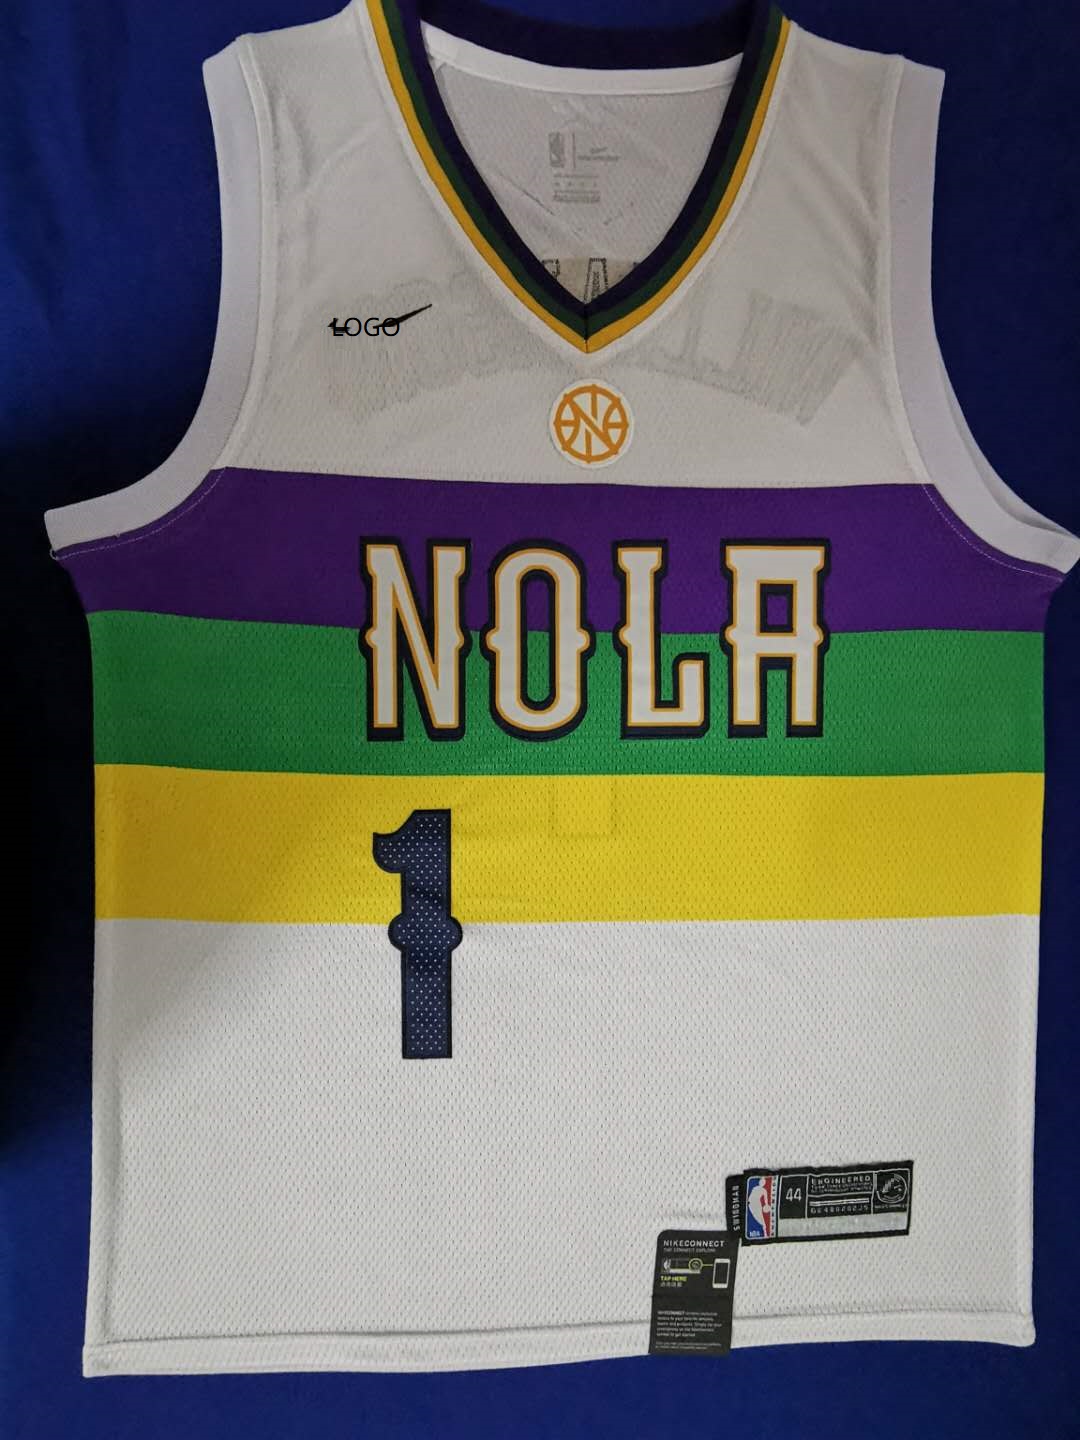 new orleans pelicans city jersey 2019